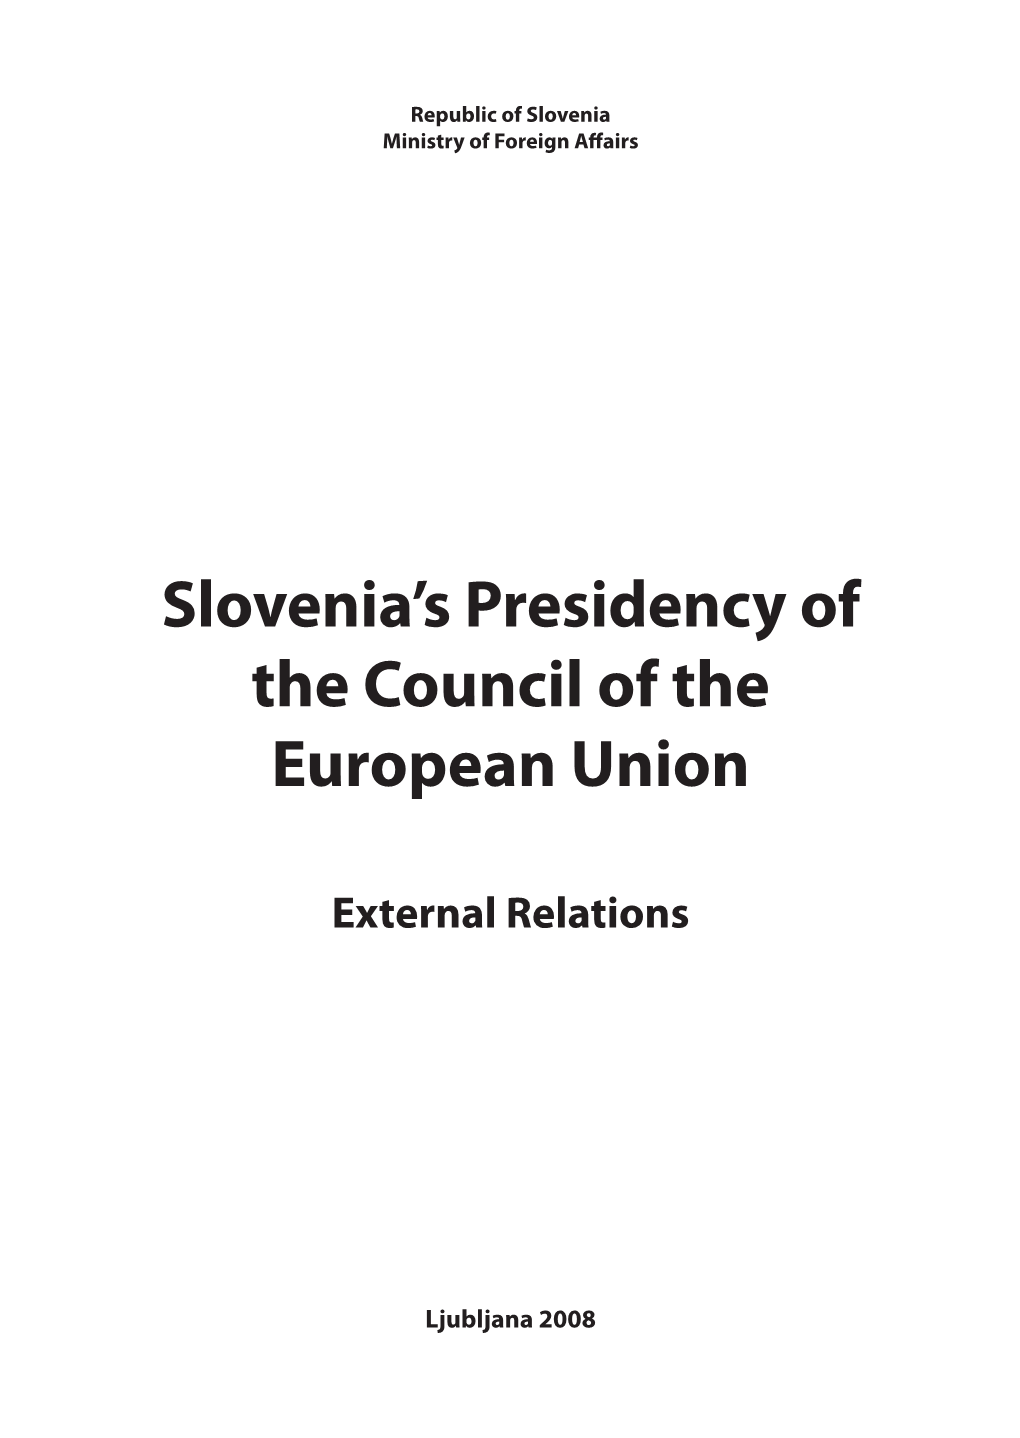 Slovenia's Presidency of the Council of the European Union